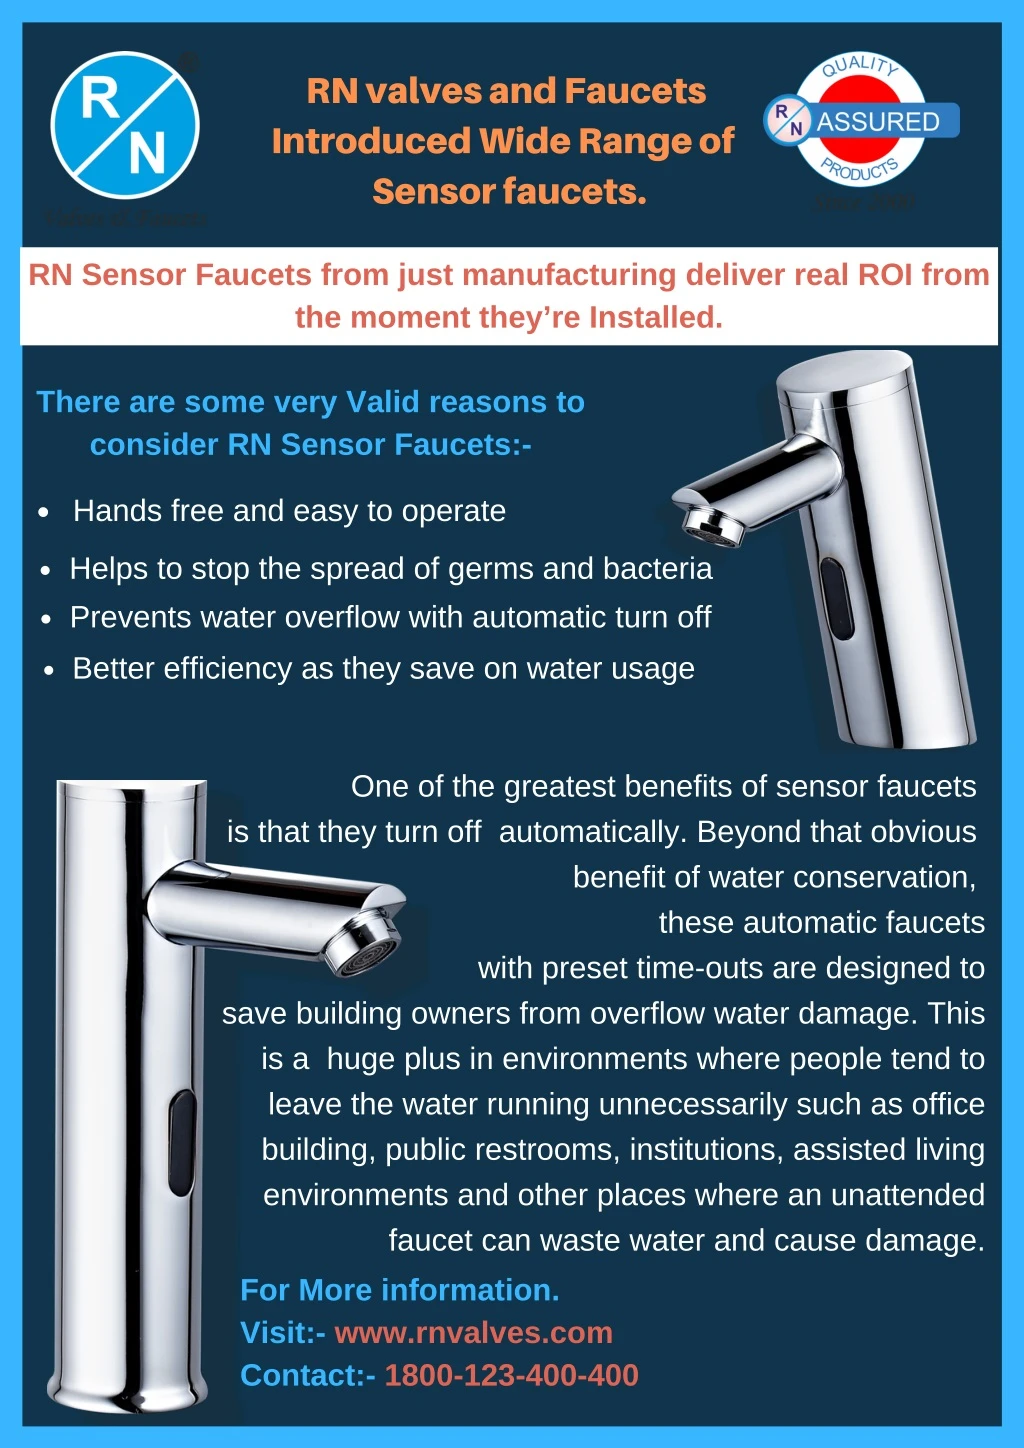 rn valves and faucets introduced wide range